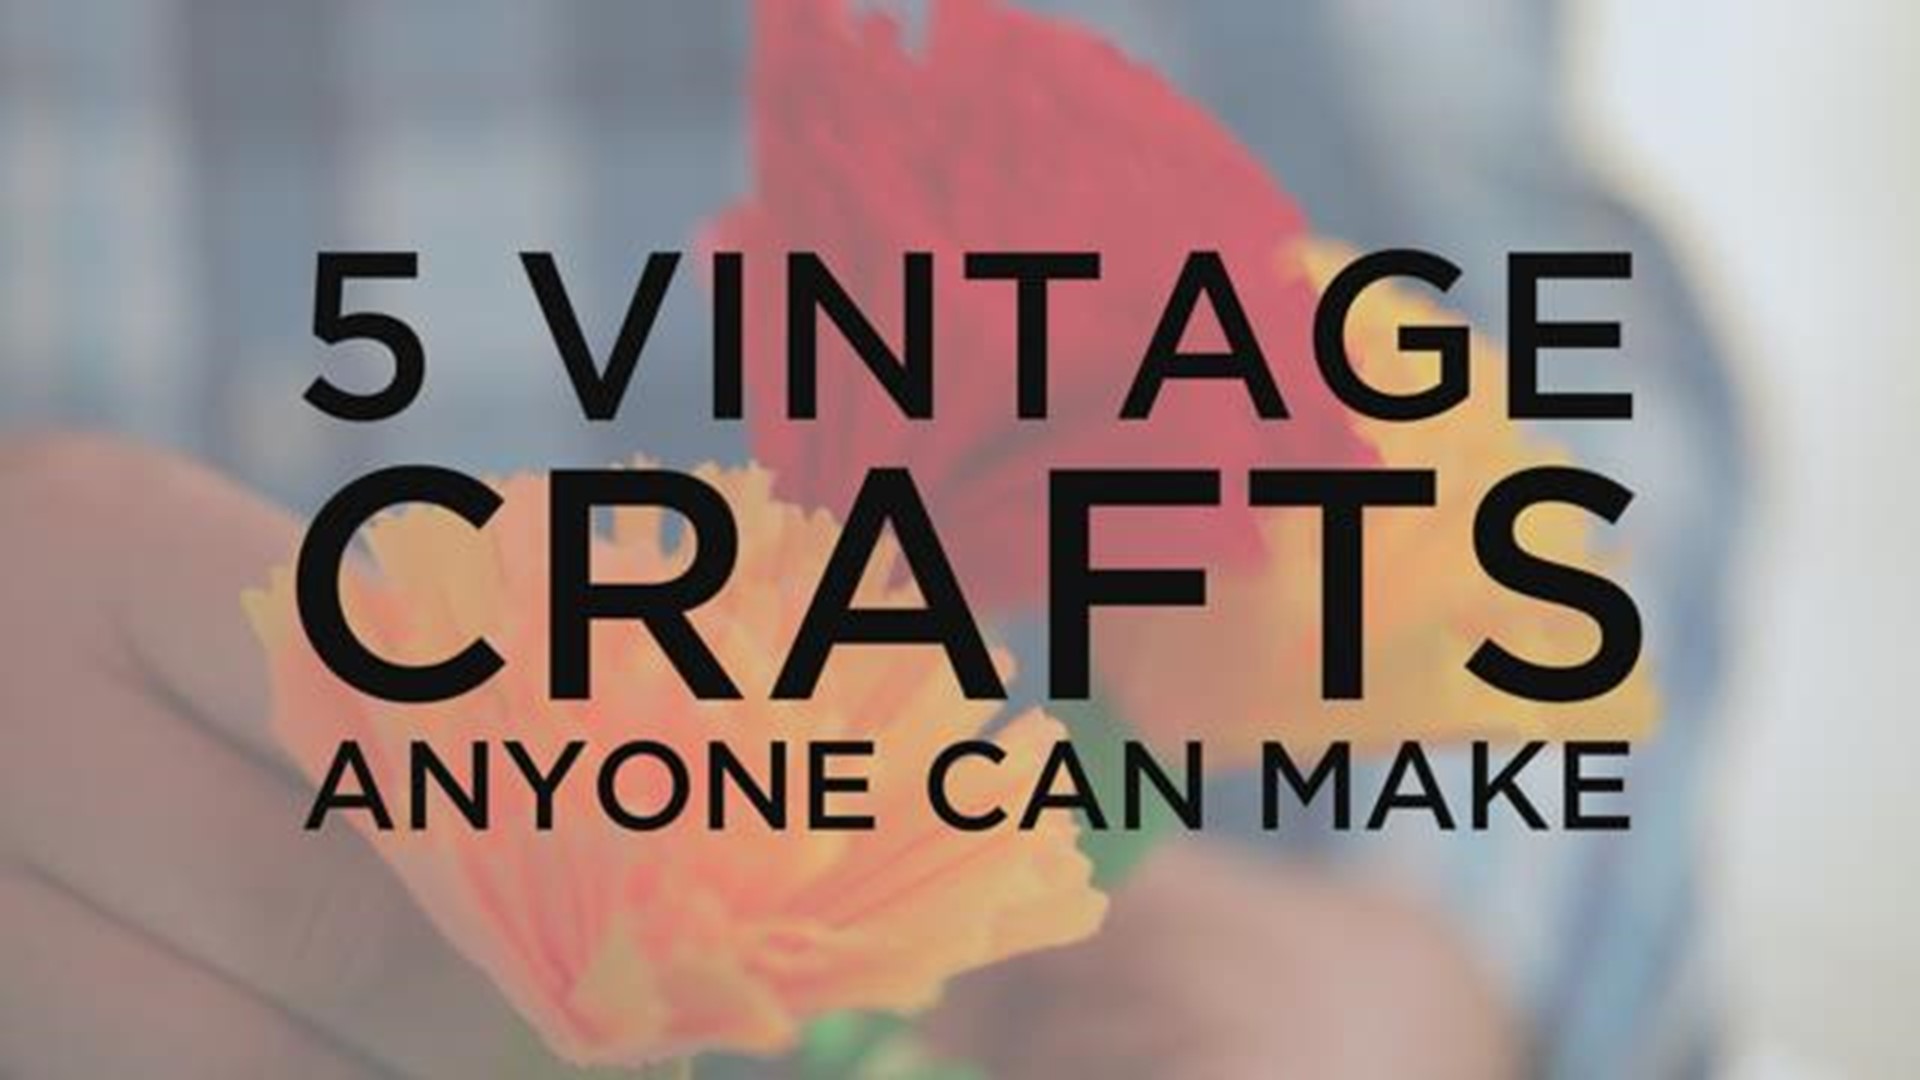 Nostalgic for objects of the past? Here are 5 vintage crafts anyone can make!